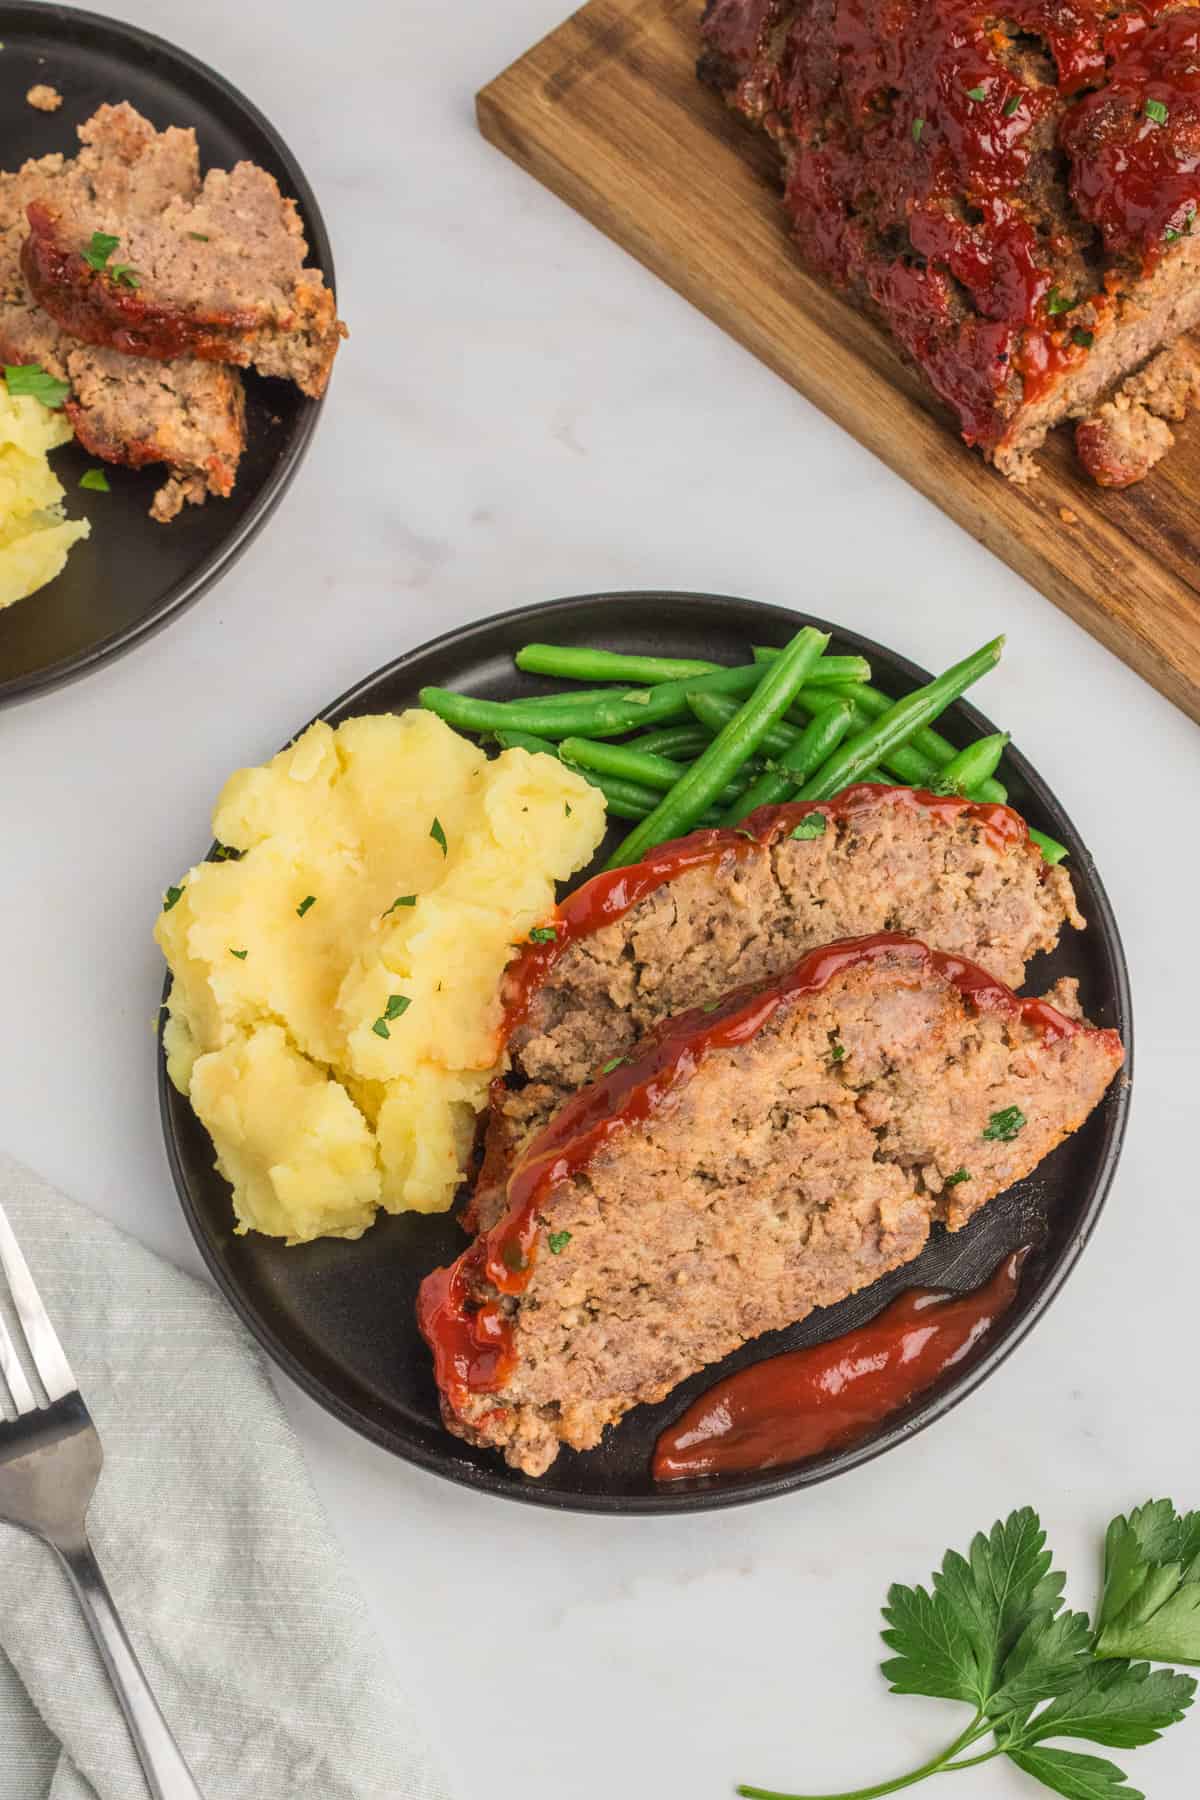 Plate with 2 slices of meatloaf, green beans, and mashed potatoes.